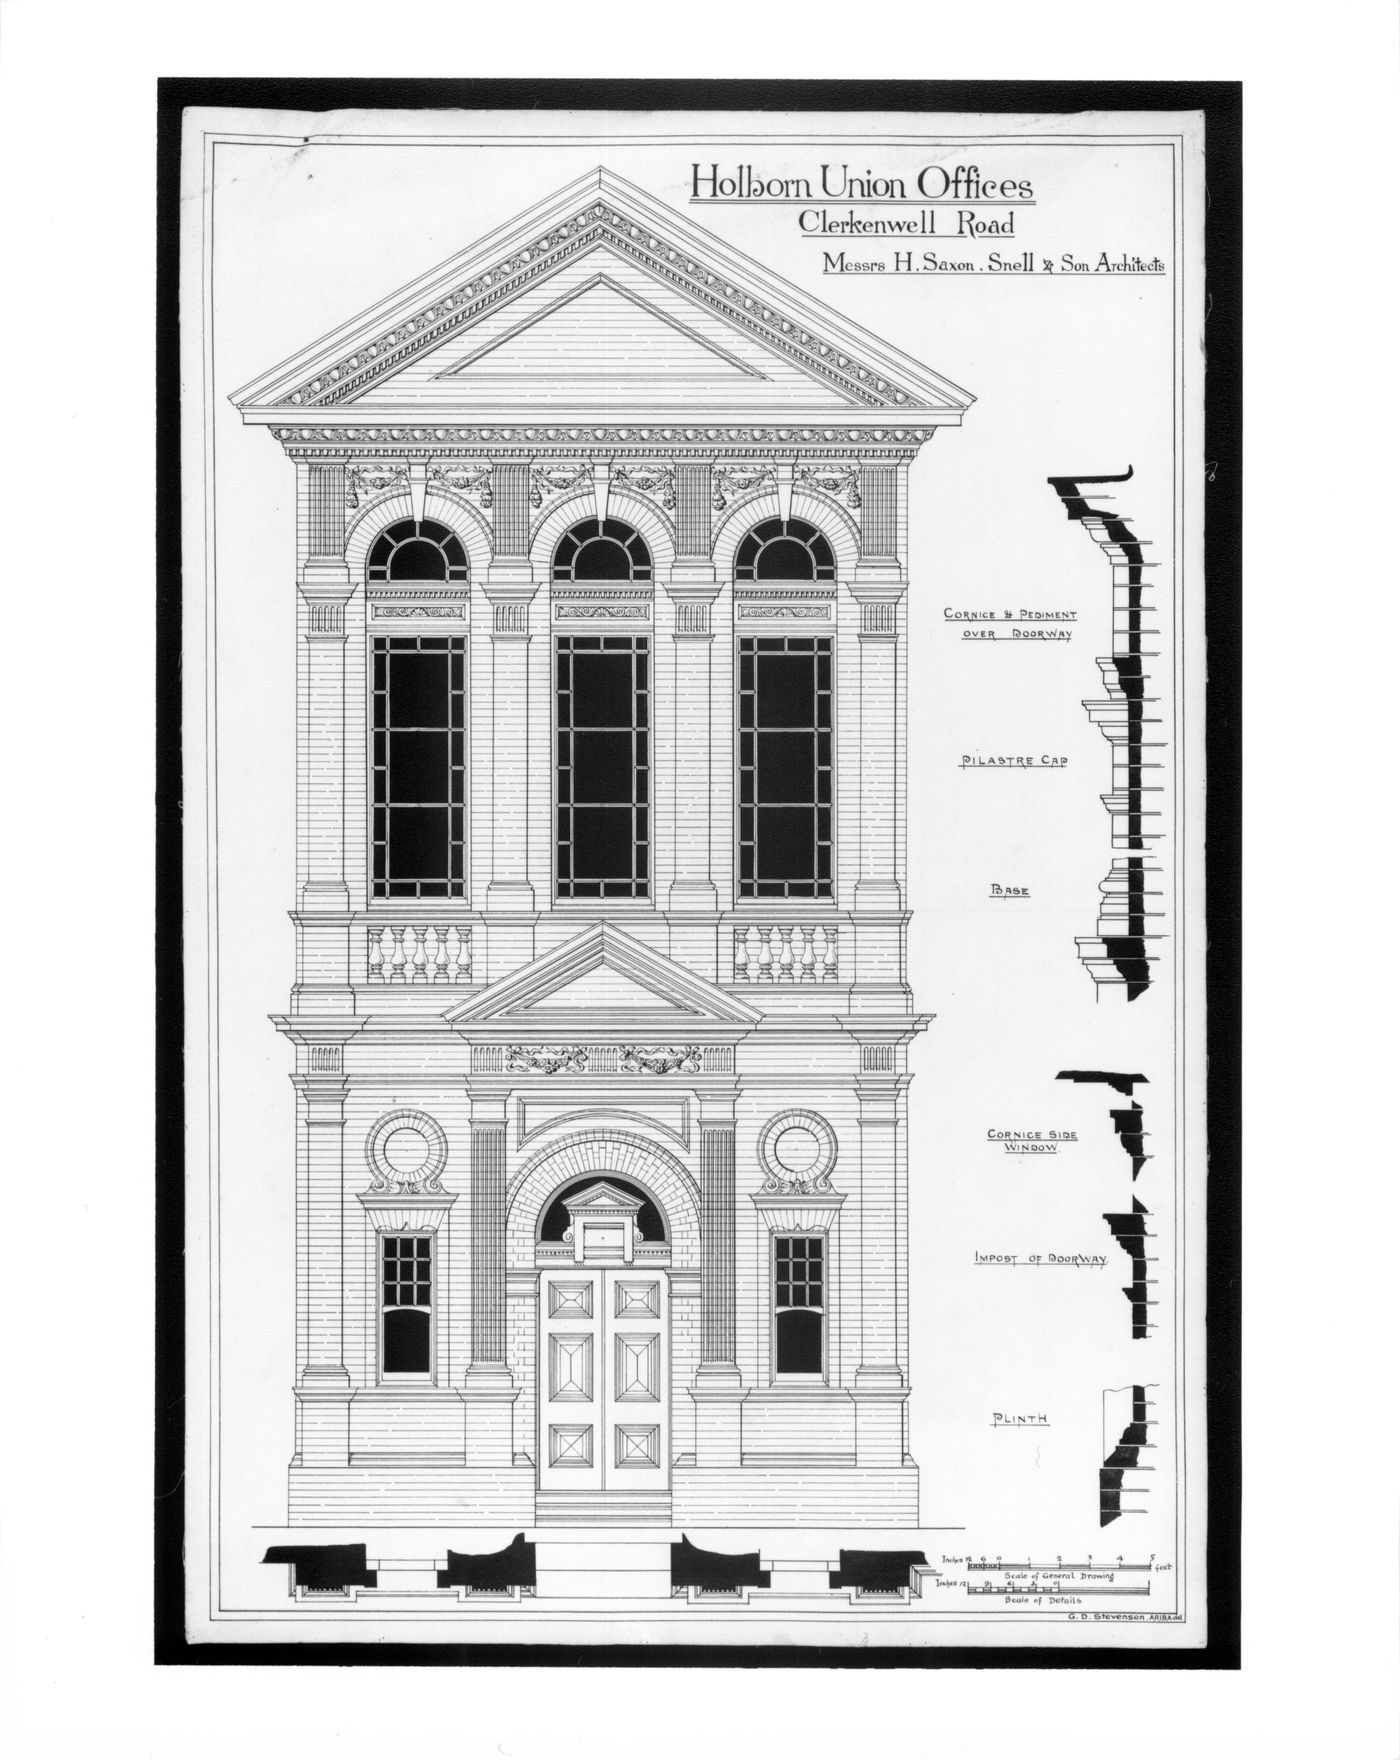 Holborn Union Offices, London - Elevation and details